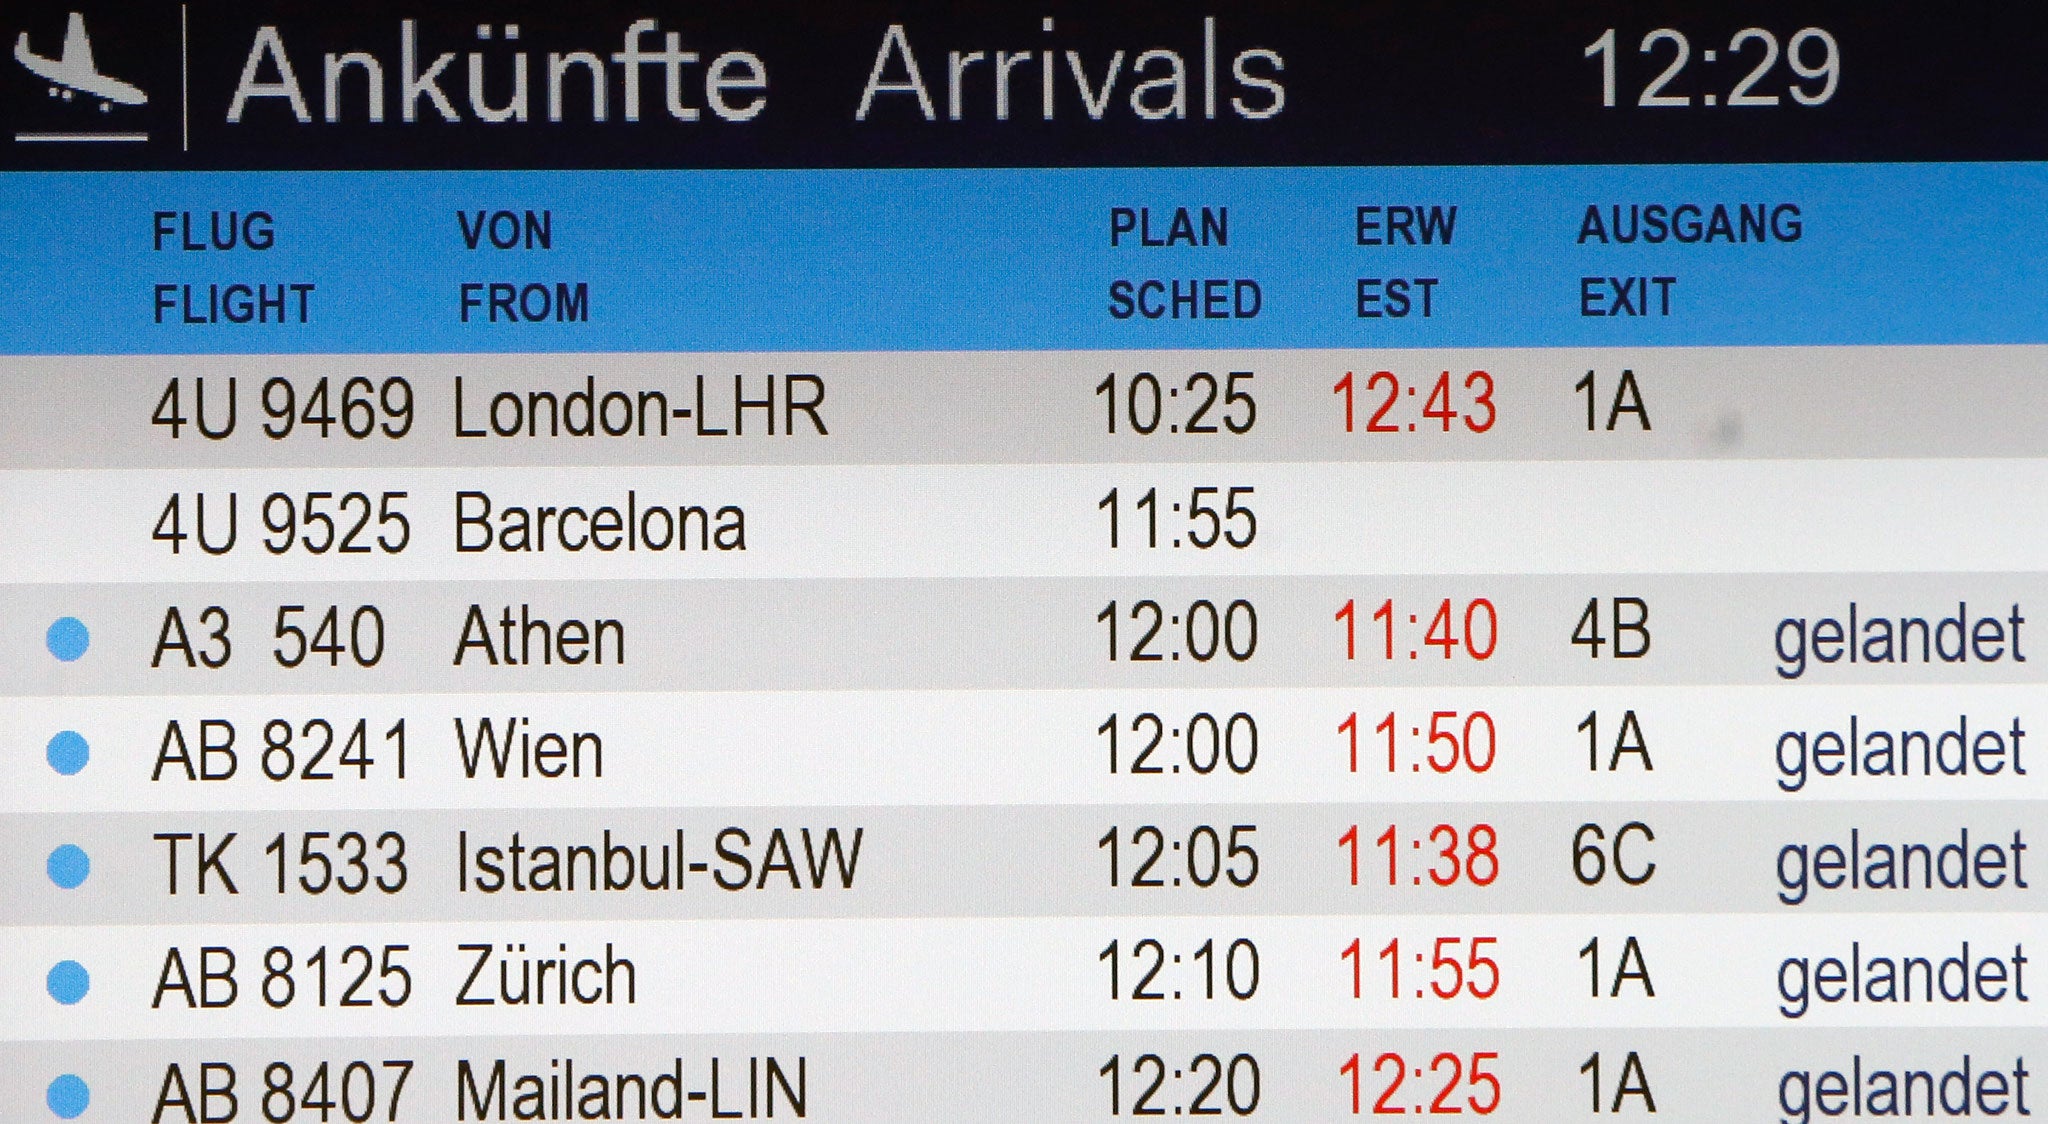 The arrivals board shows flight 4U 9525 without a status at the airport in Duesseldorf, Germany